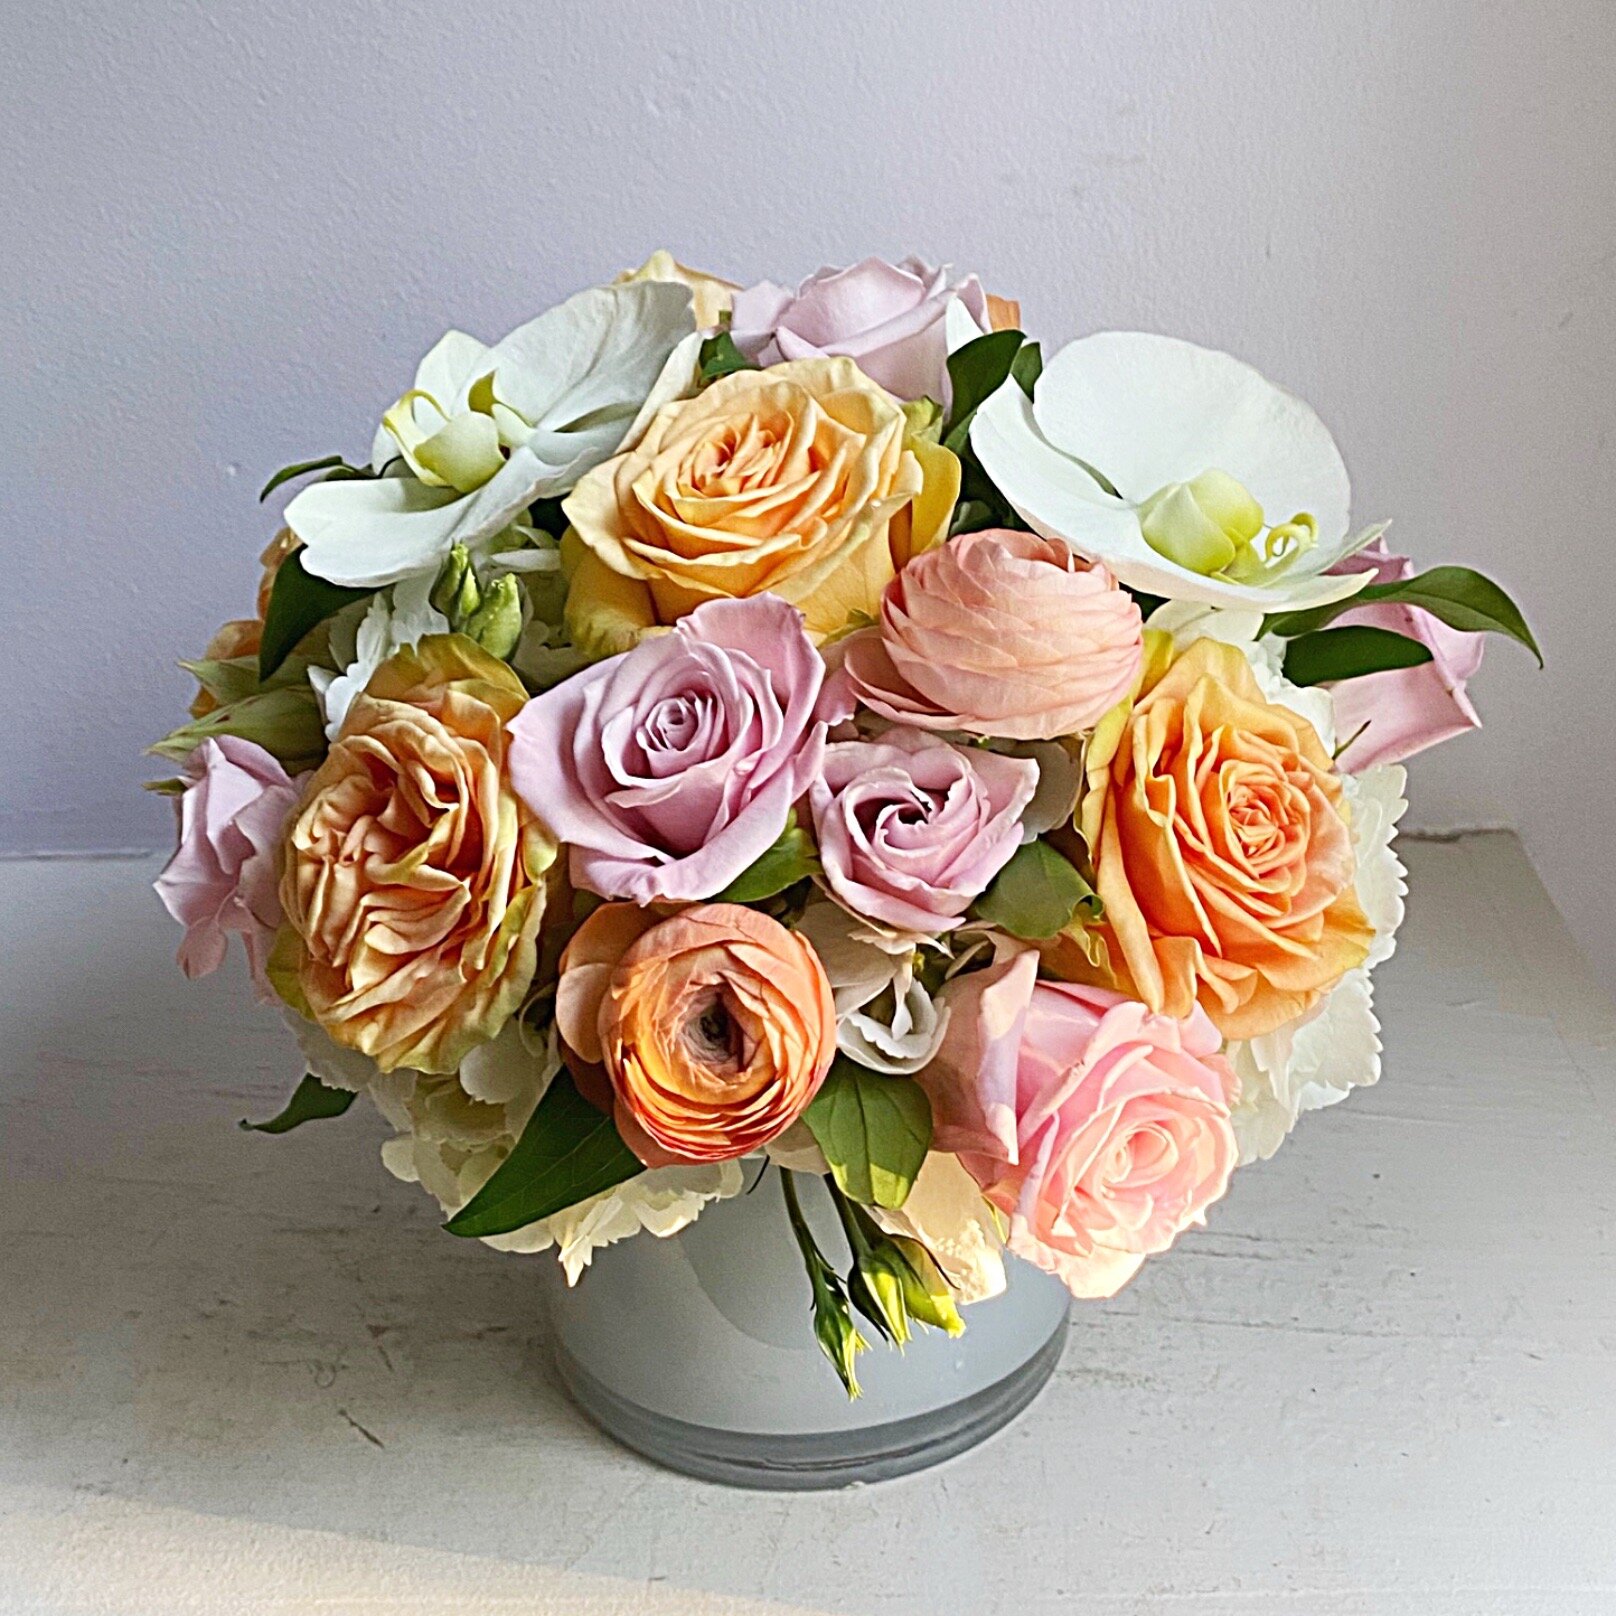 Peach and White Flowers - Atelier Ashley Flowers